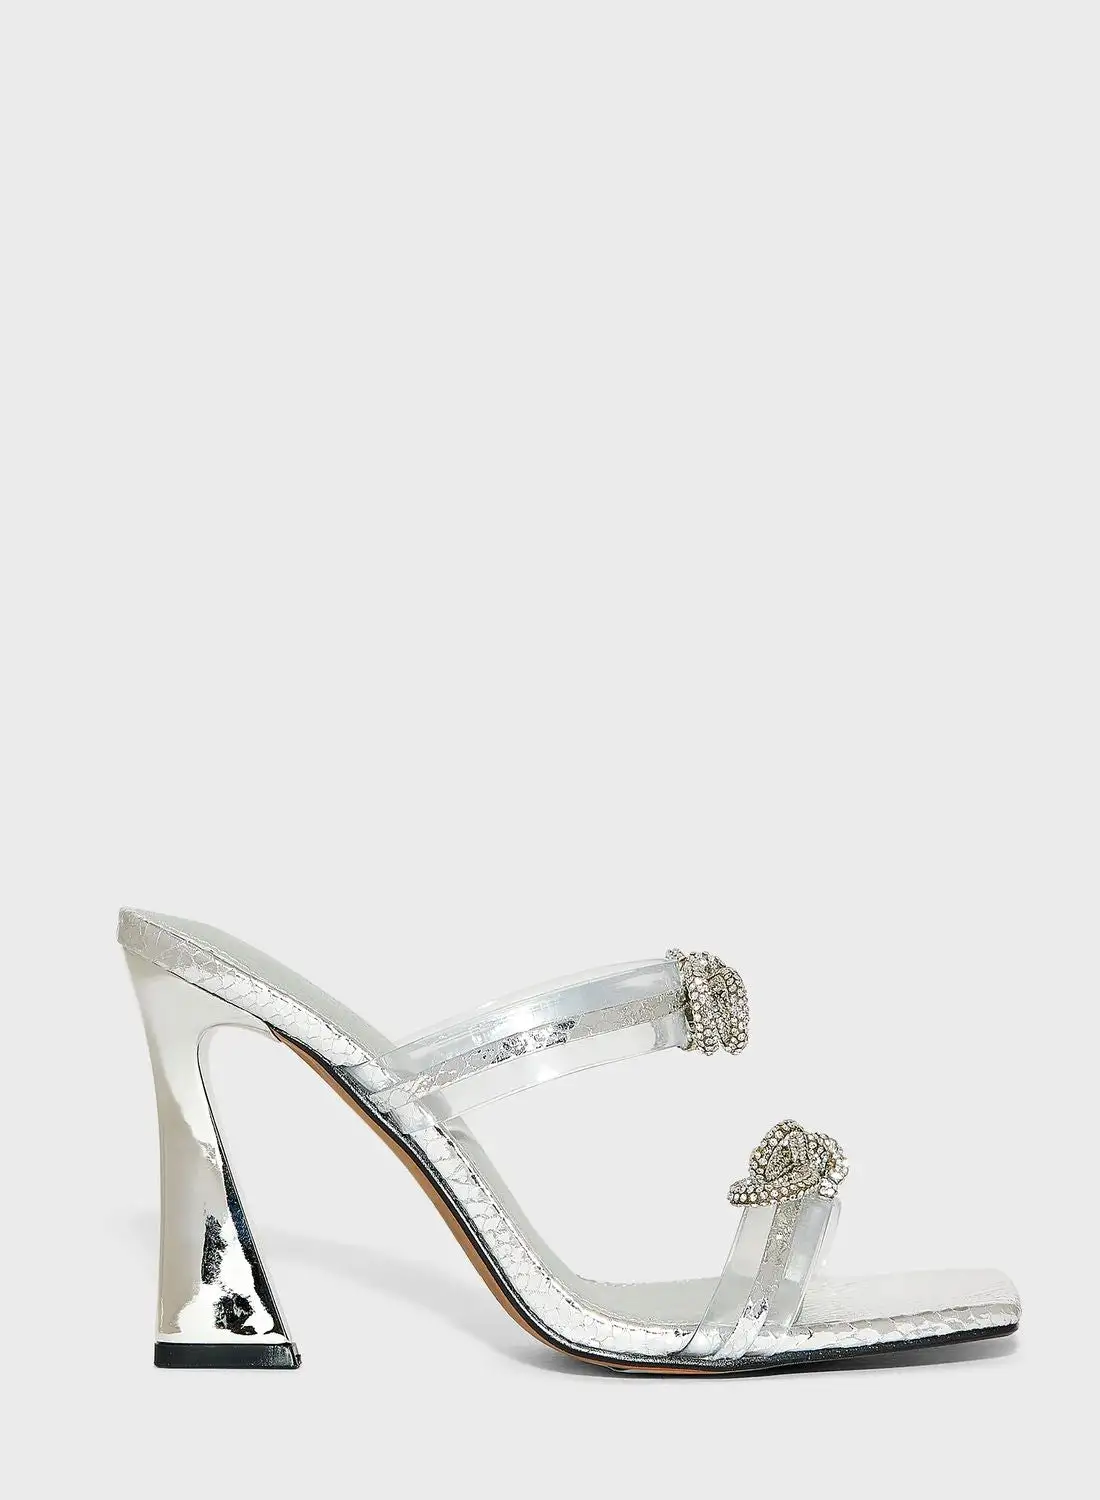 RIVER ISLAND Wide Bow Perspex Mule Sandals